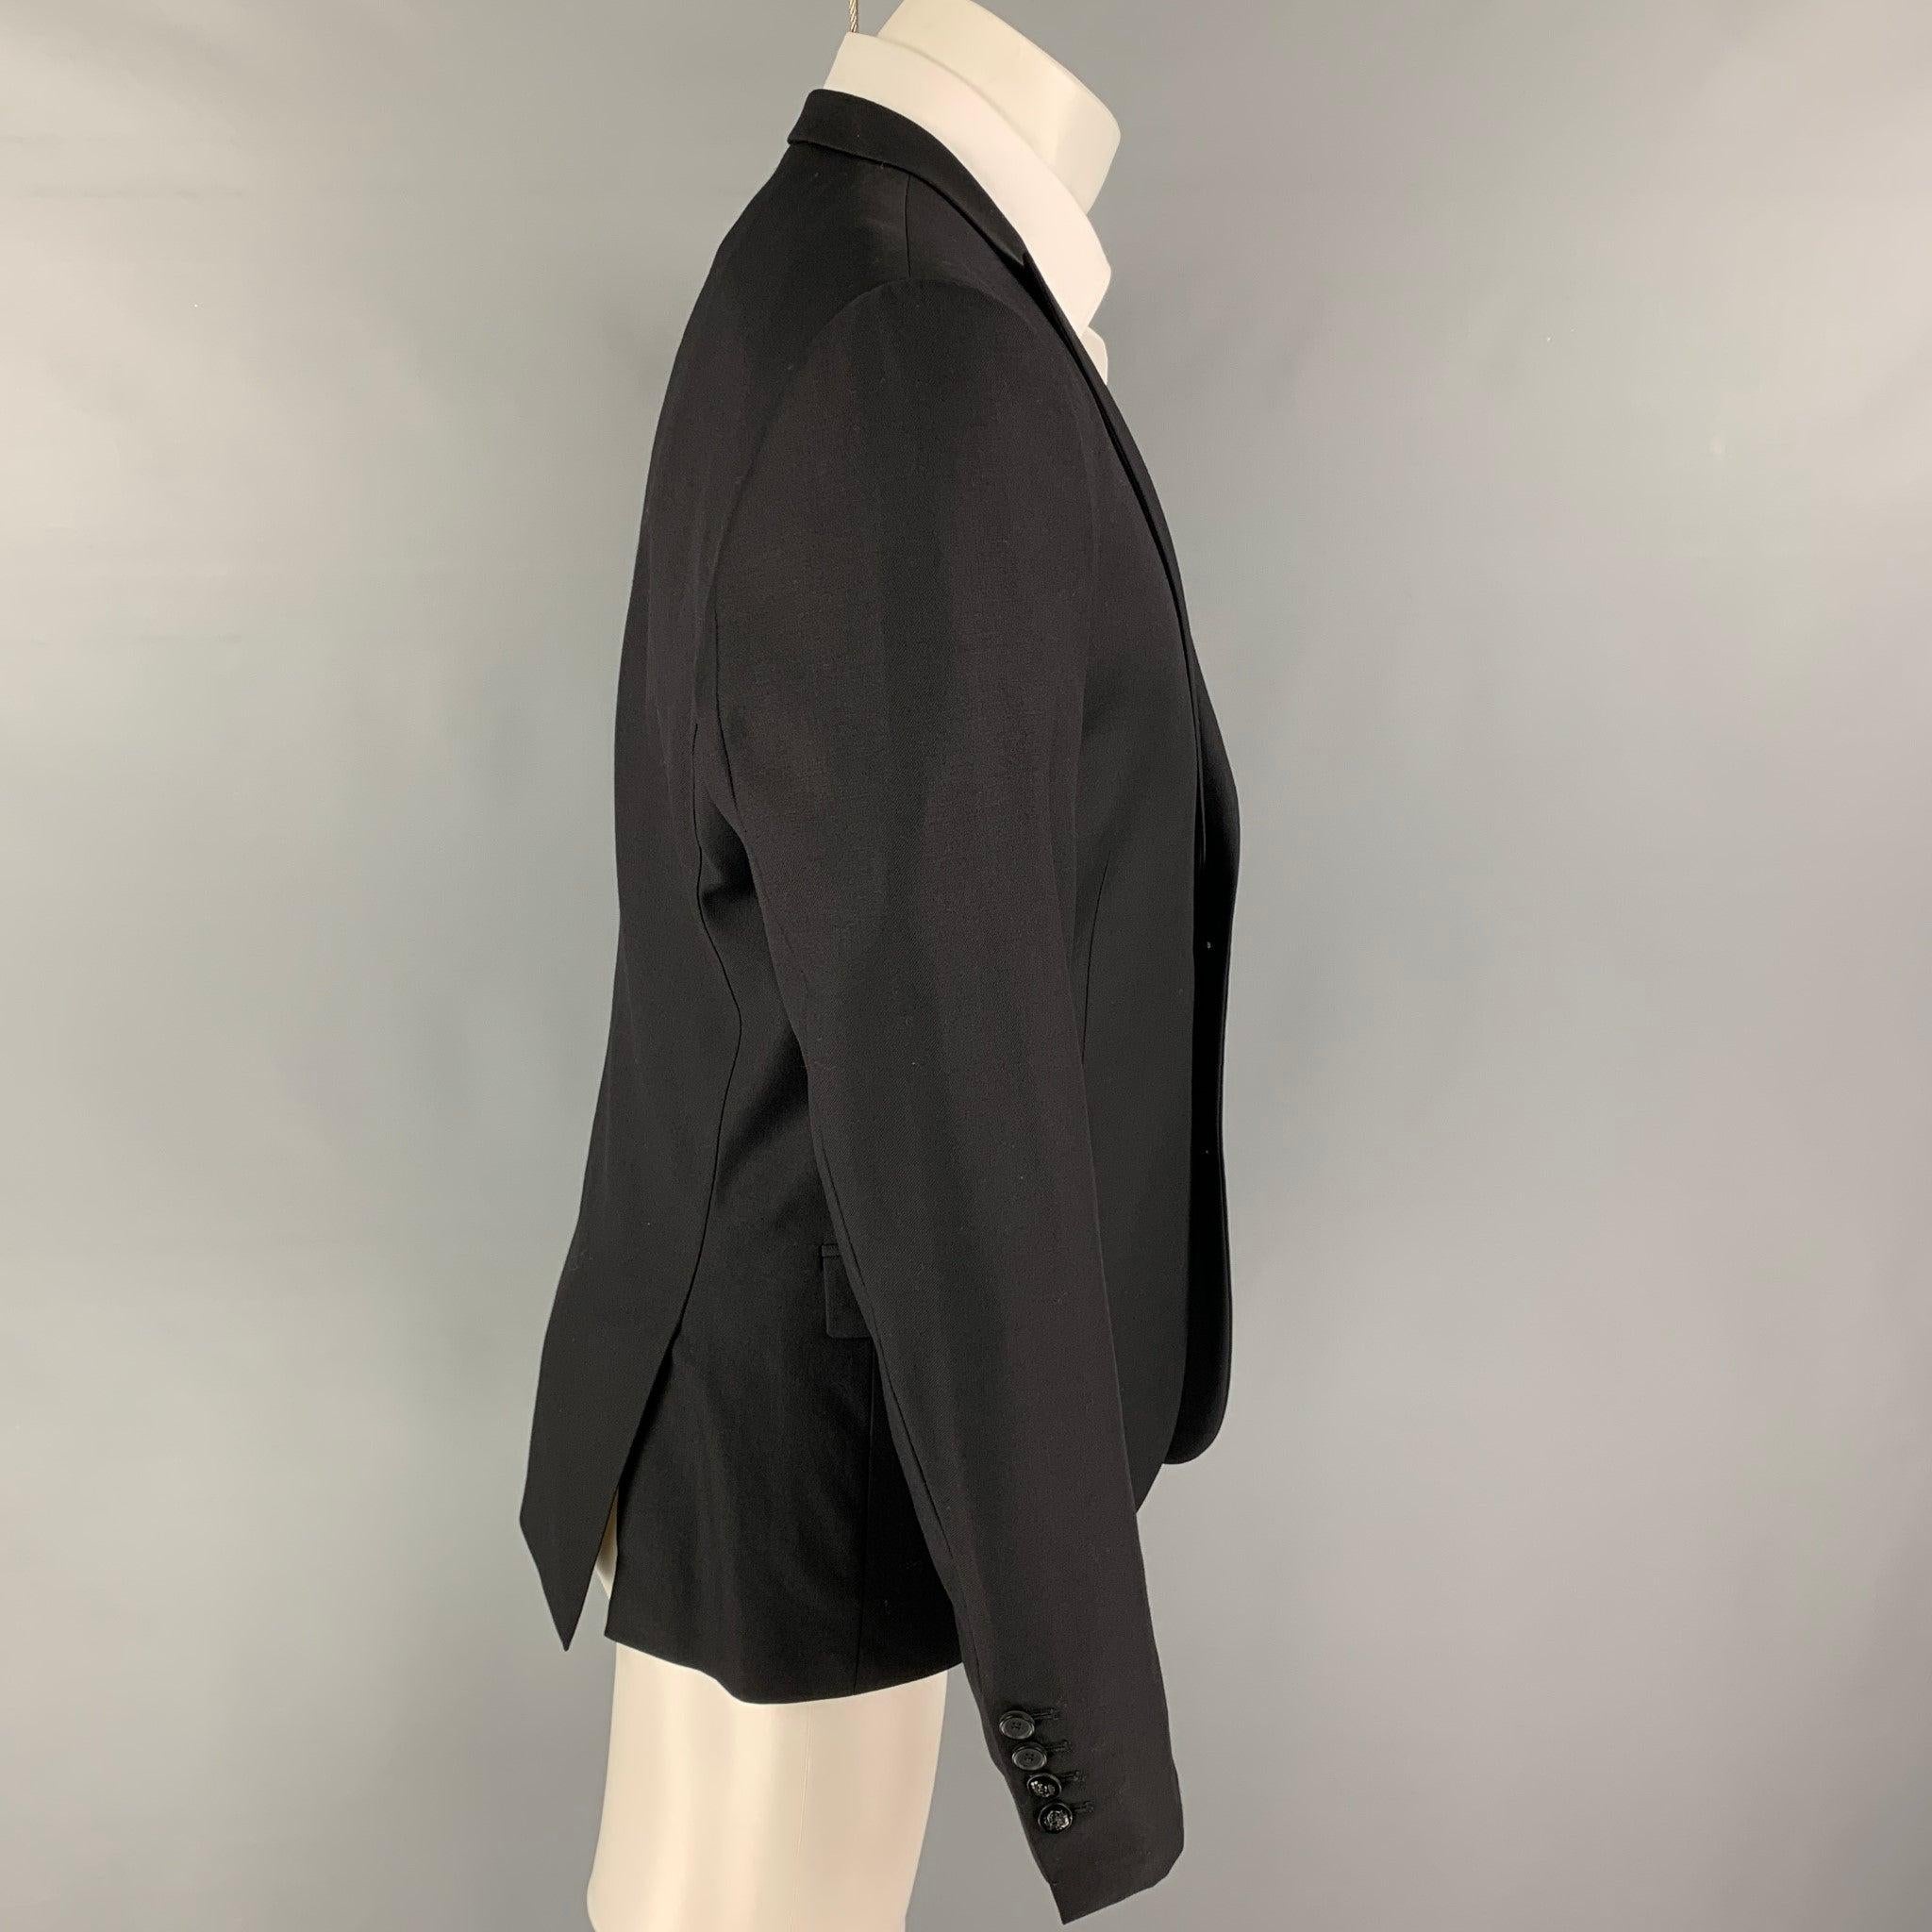 THE KOOPLES
sport coat comes in a black wool with a full liner featuring a peak lapel, flap pockets, double back vent, and a double button closure. Excellent
Pre-Owned Condition. 

Marked:   50 

Measurements: 
 
Shoulder: 17.5 inches Chest: 40